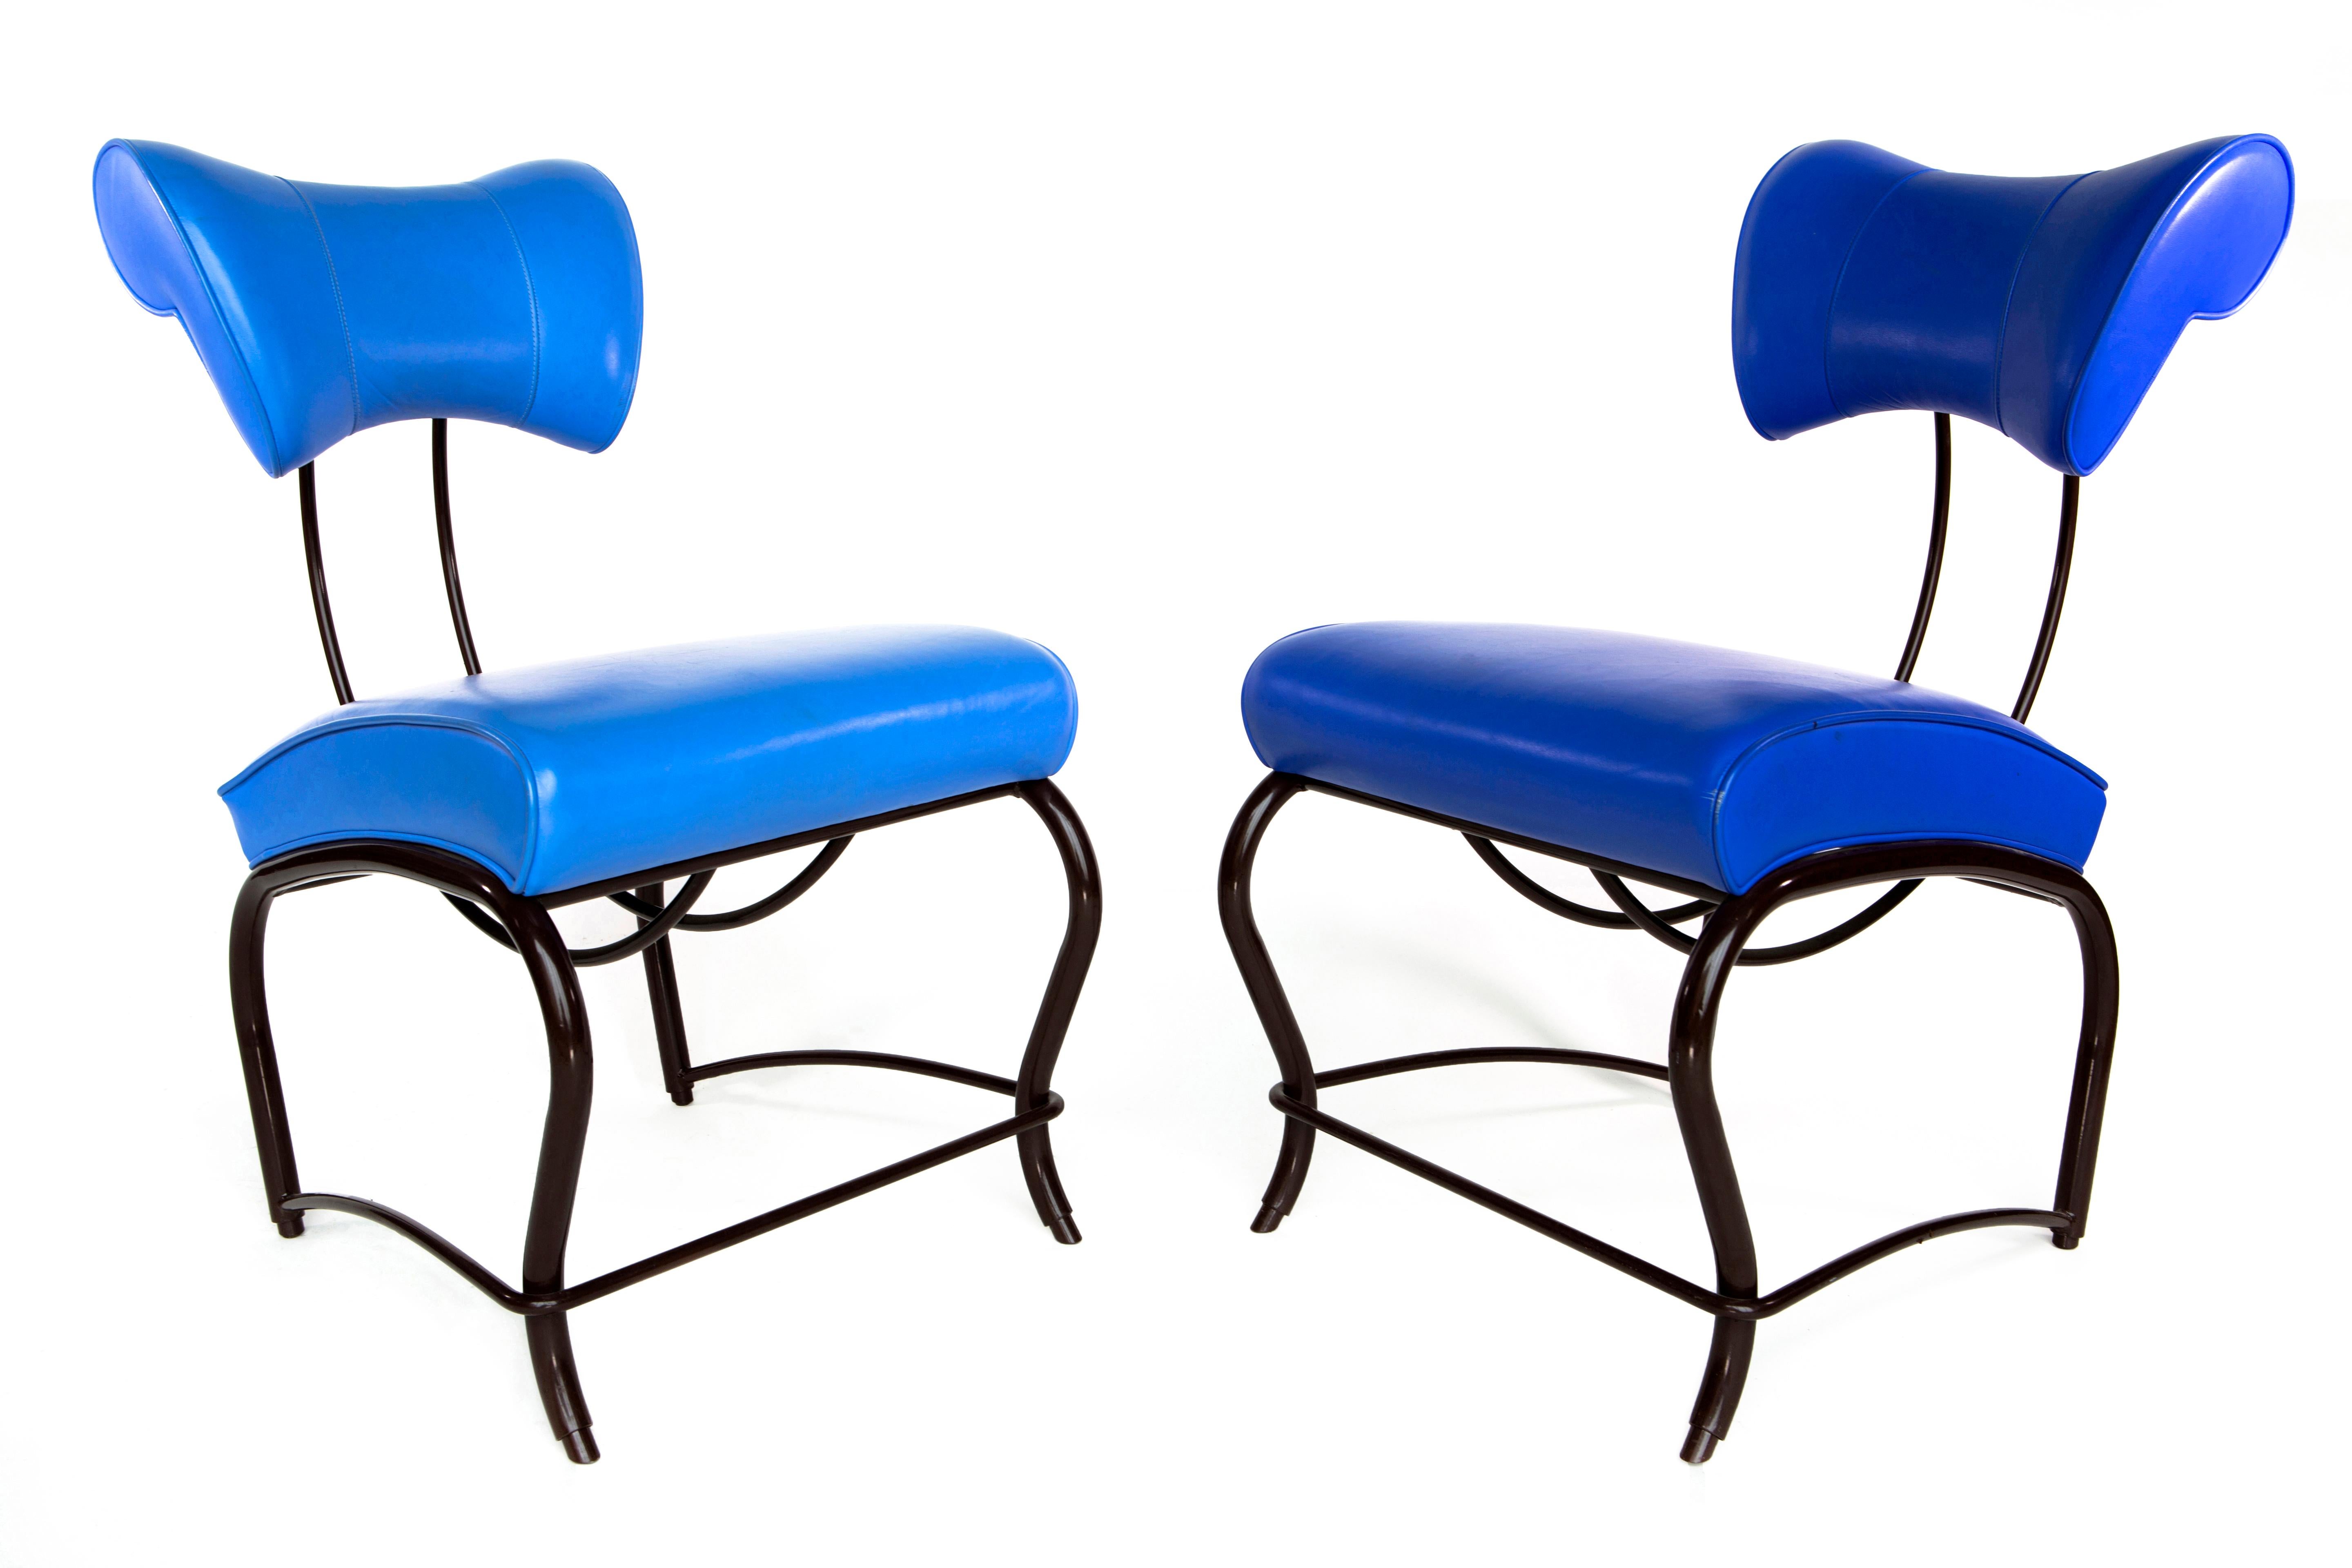 Jordan Mozer (b.1958) Elbert Chair: Times Square Variation 2006: Custom Dyed Leather and Powder Coated Steel.  Made in the US. 31